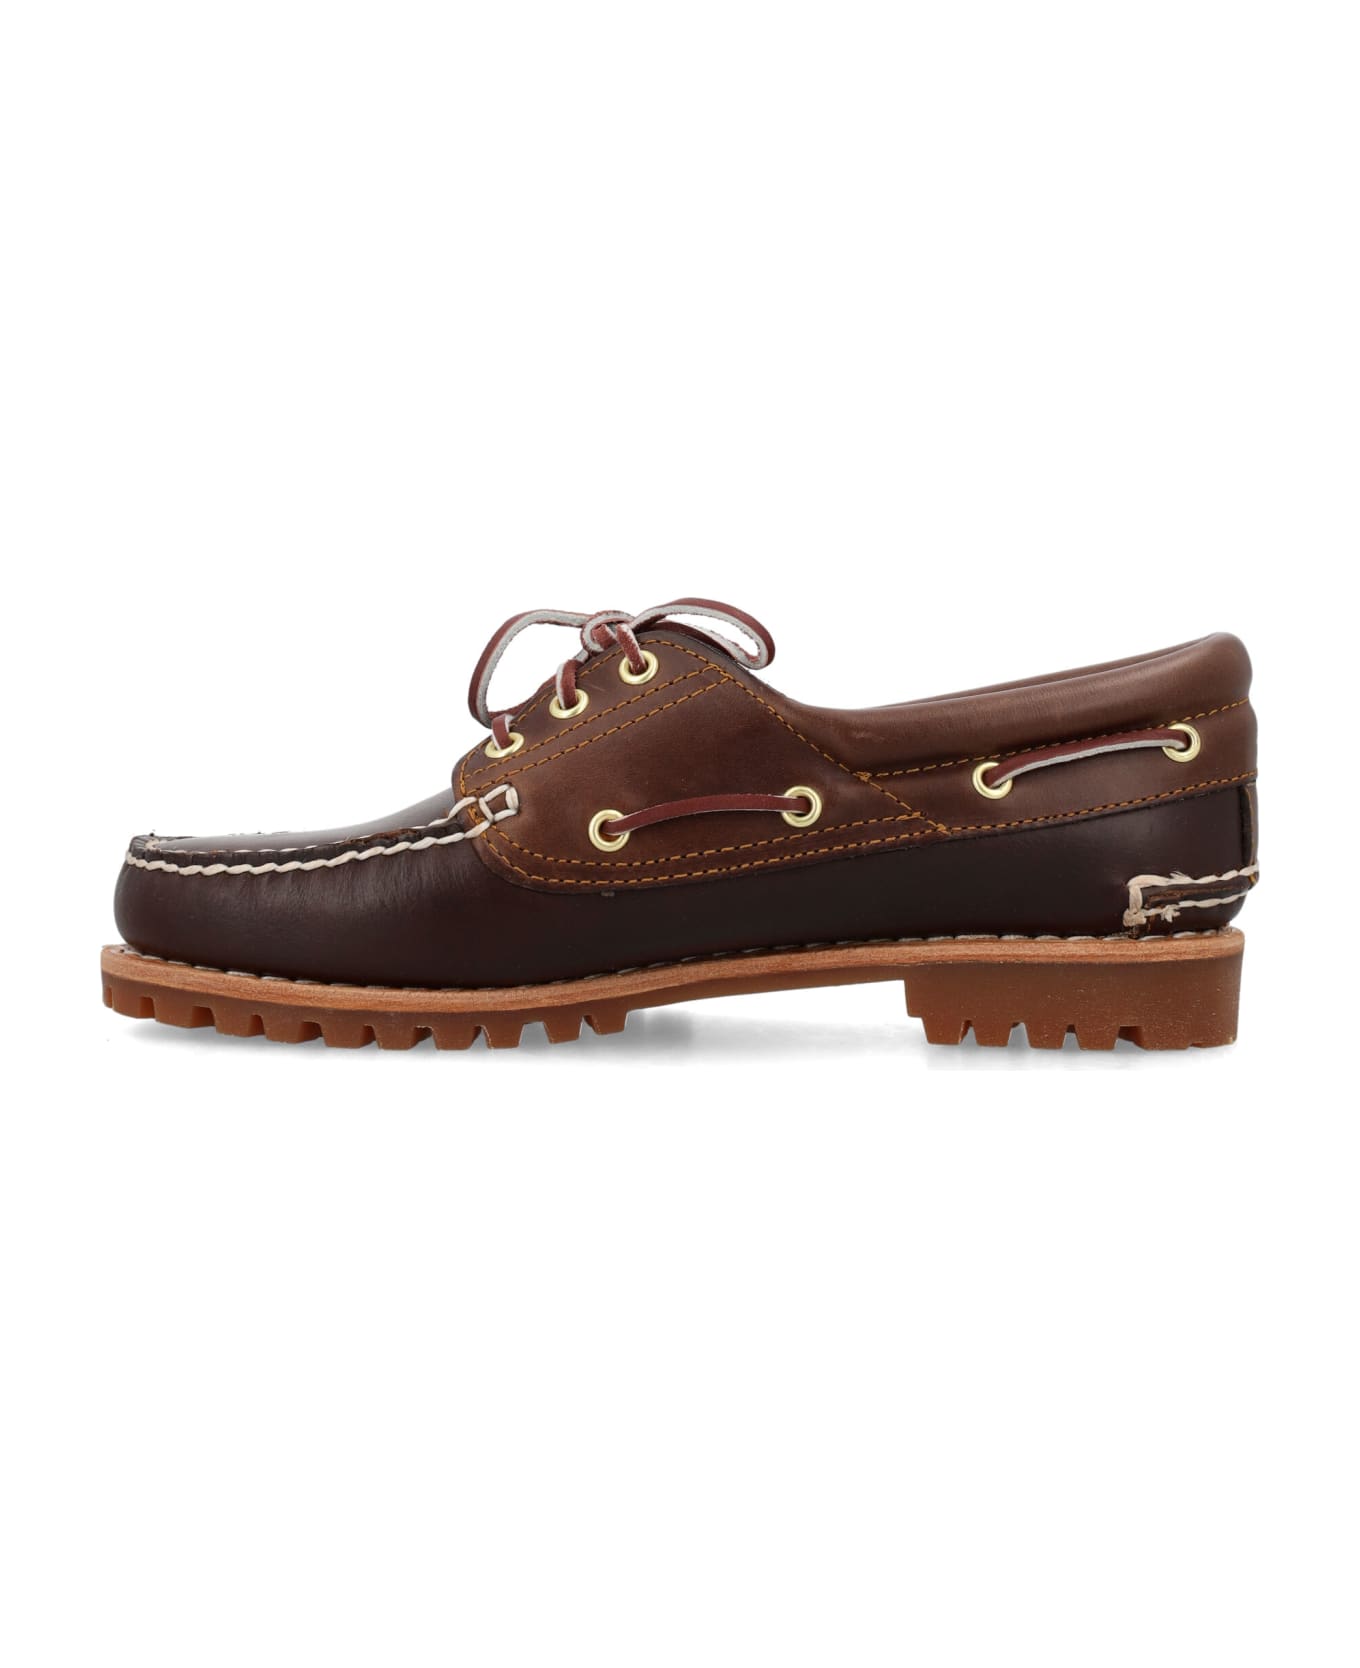 Timberland Noreen Boat Loafers - MID BROWN フラットシューズ